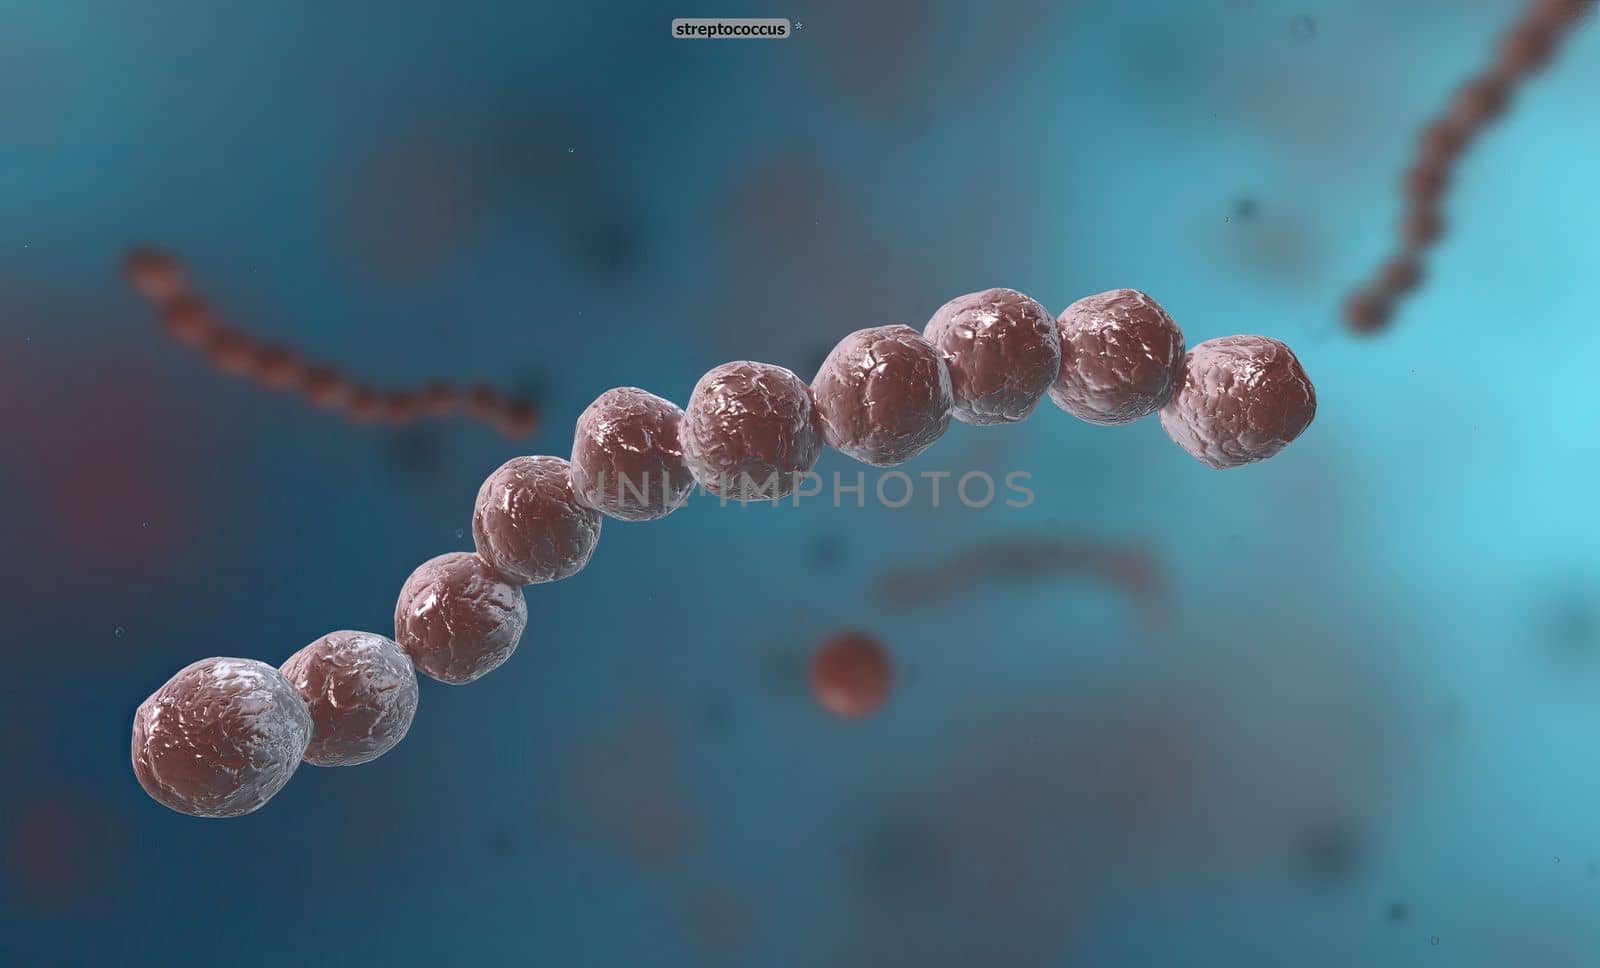 Spirillum is a bacterium from the Proteobacteria phylum with a spiral-shaped cell morphology. by creativepic